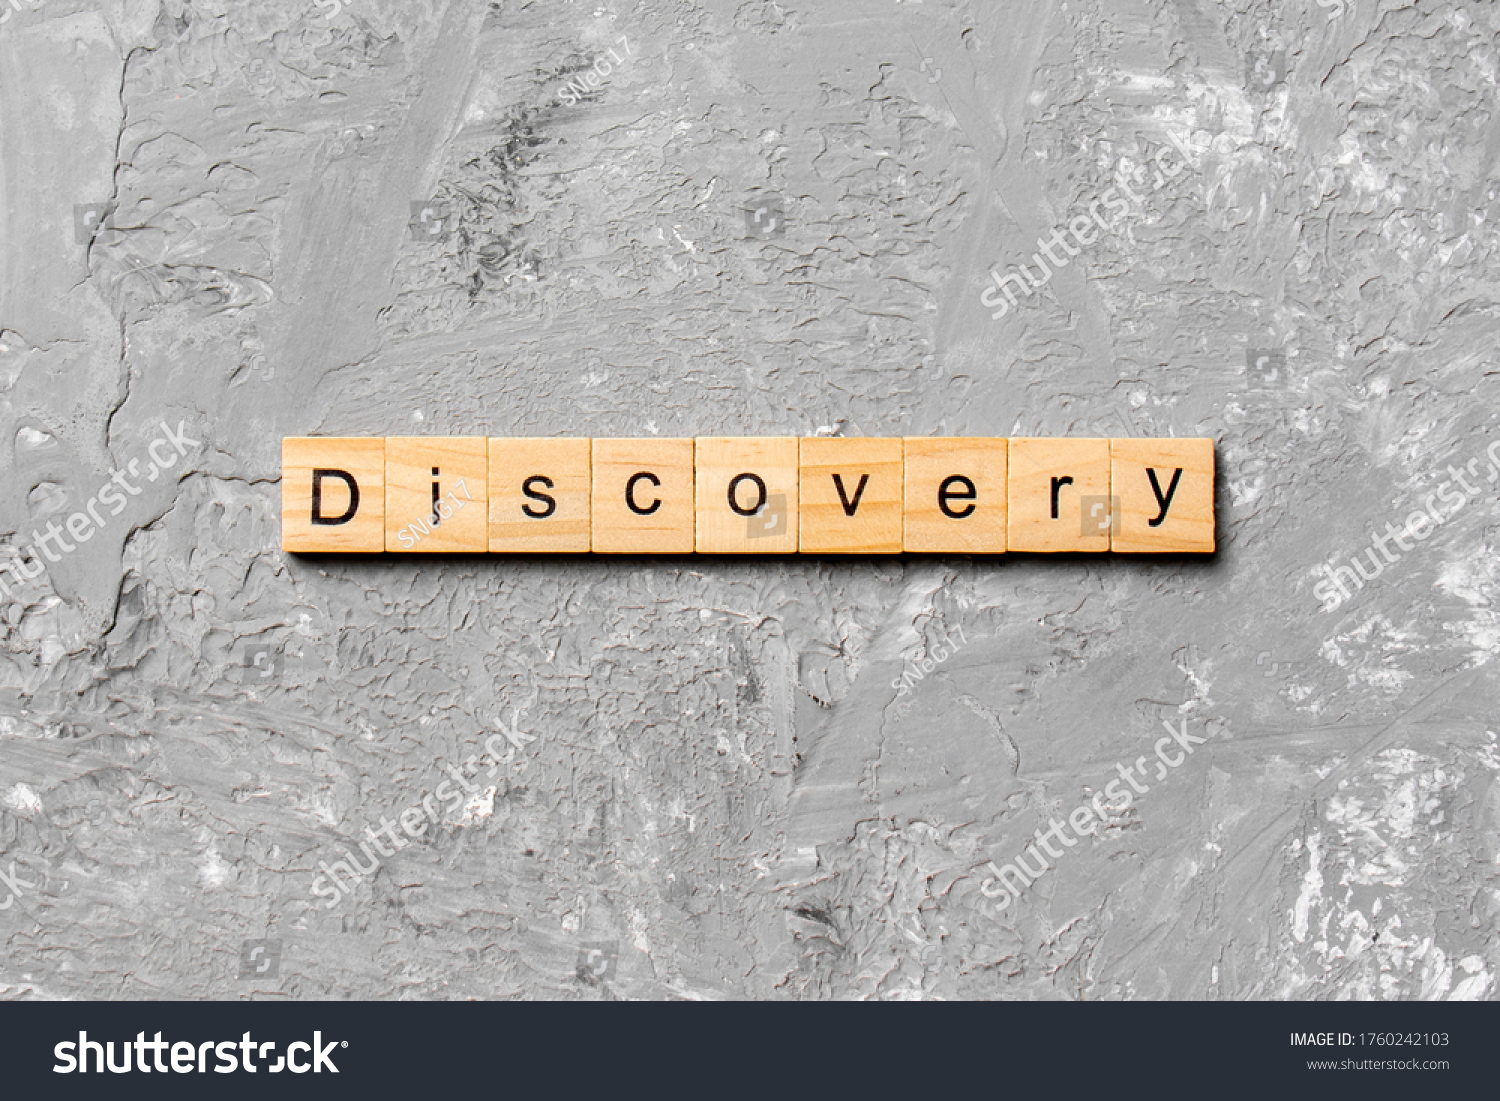 discovery word written on wood block. discovery text on table, concept. #1760242103